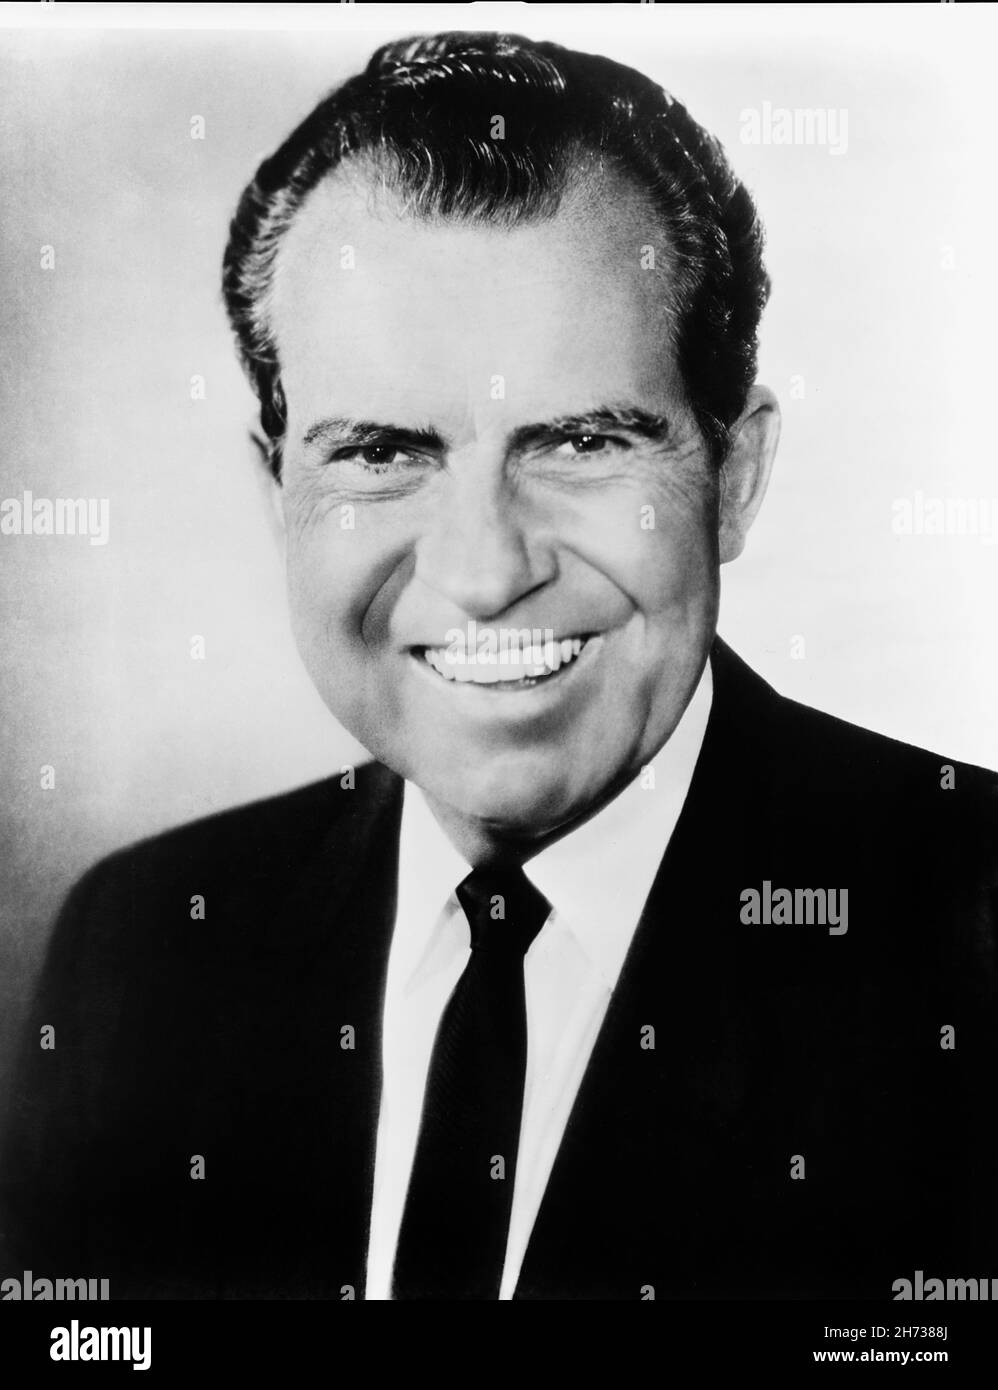 Richard M. Nixon (1913-1994), 37th President of the United States, head and shoulders Portrait, official White House Photo, 1969 Stock Photo